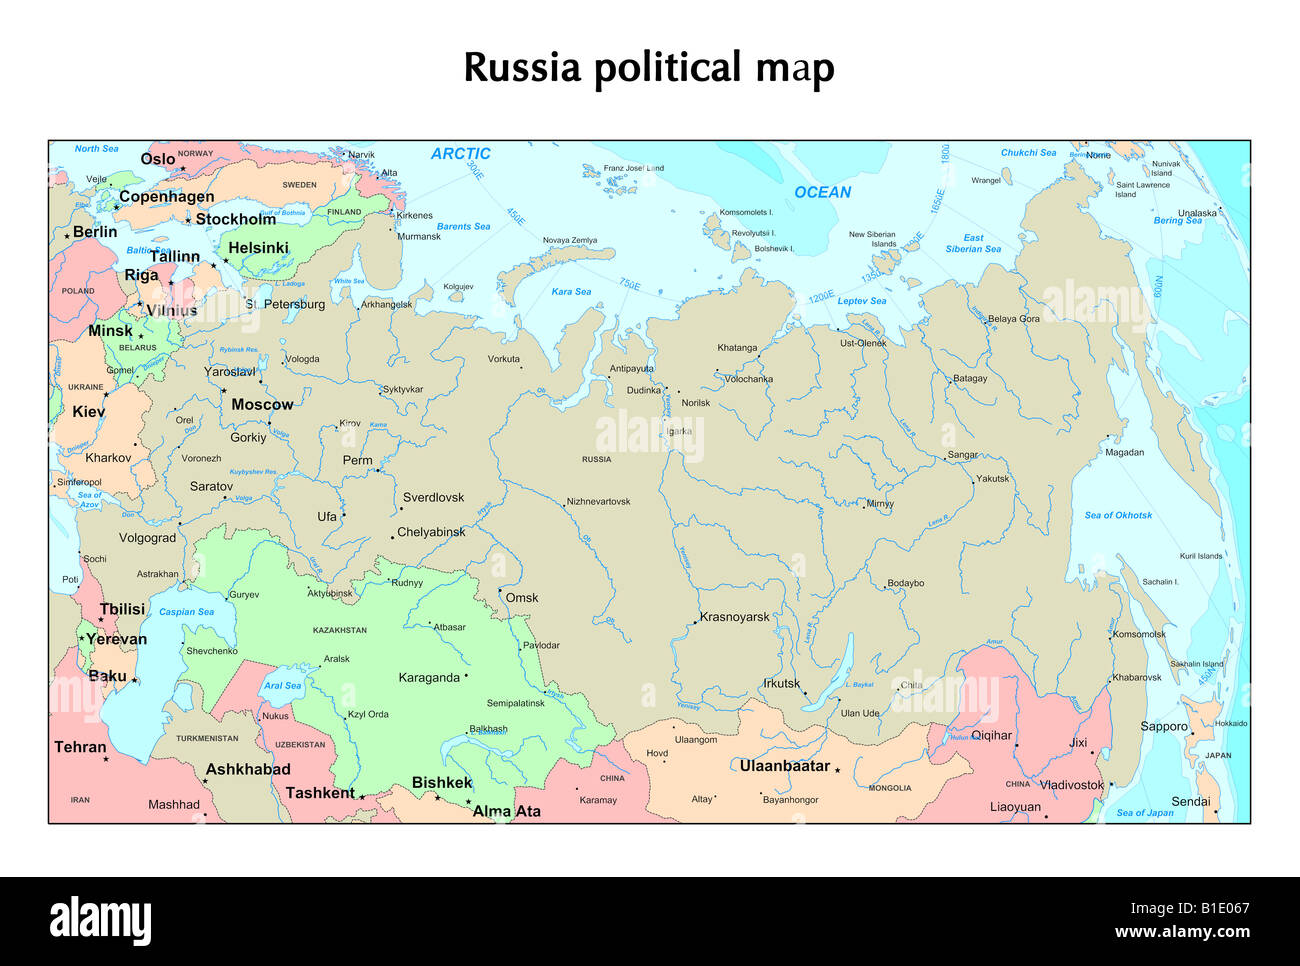 Russia political map Stock Photo